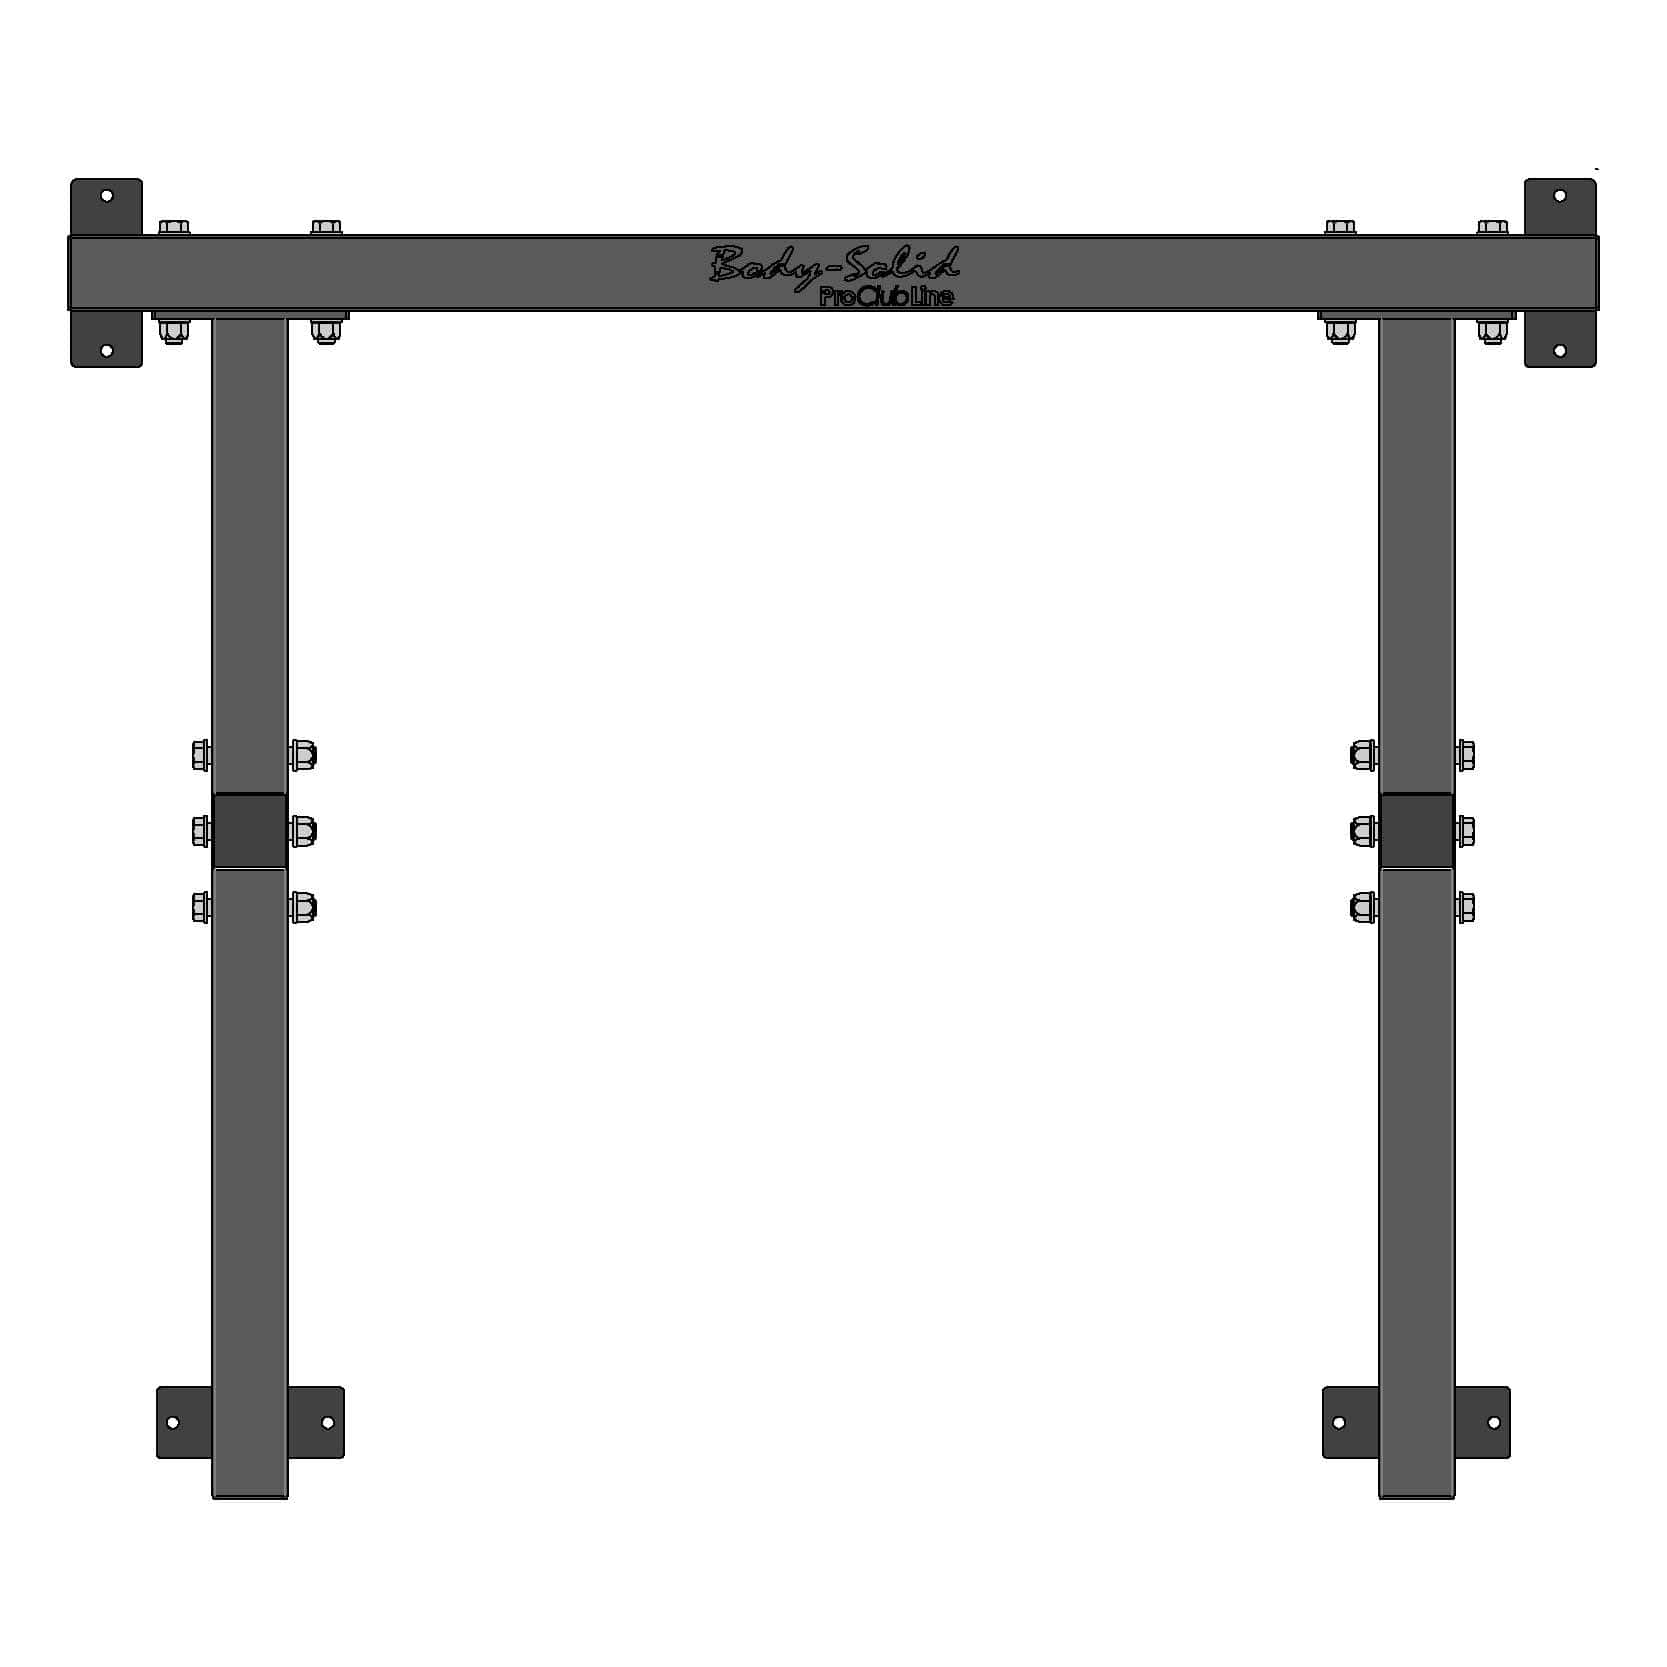 Body-Solid SPR250 Squat Stand Floor Plan Top View